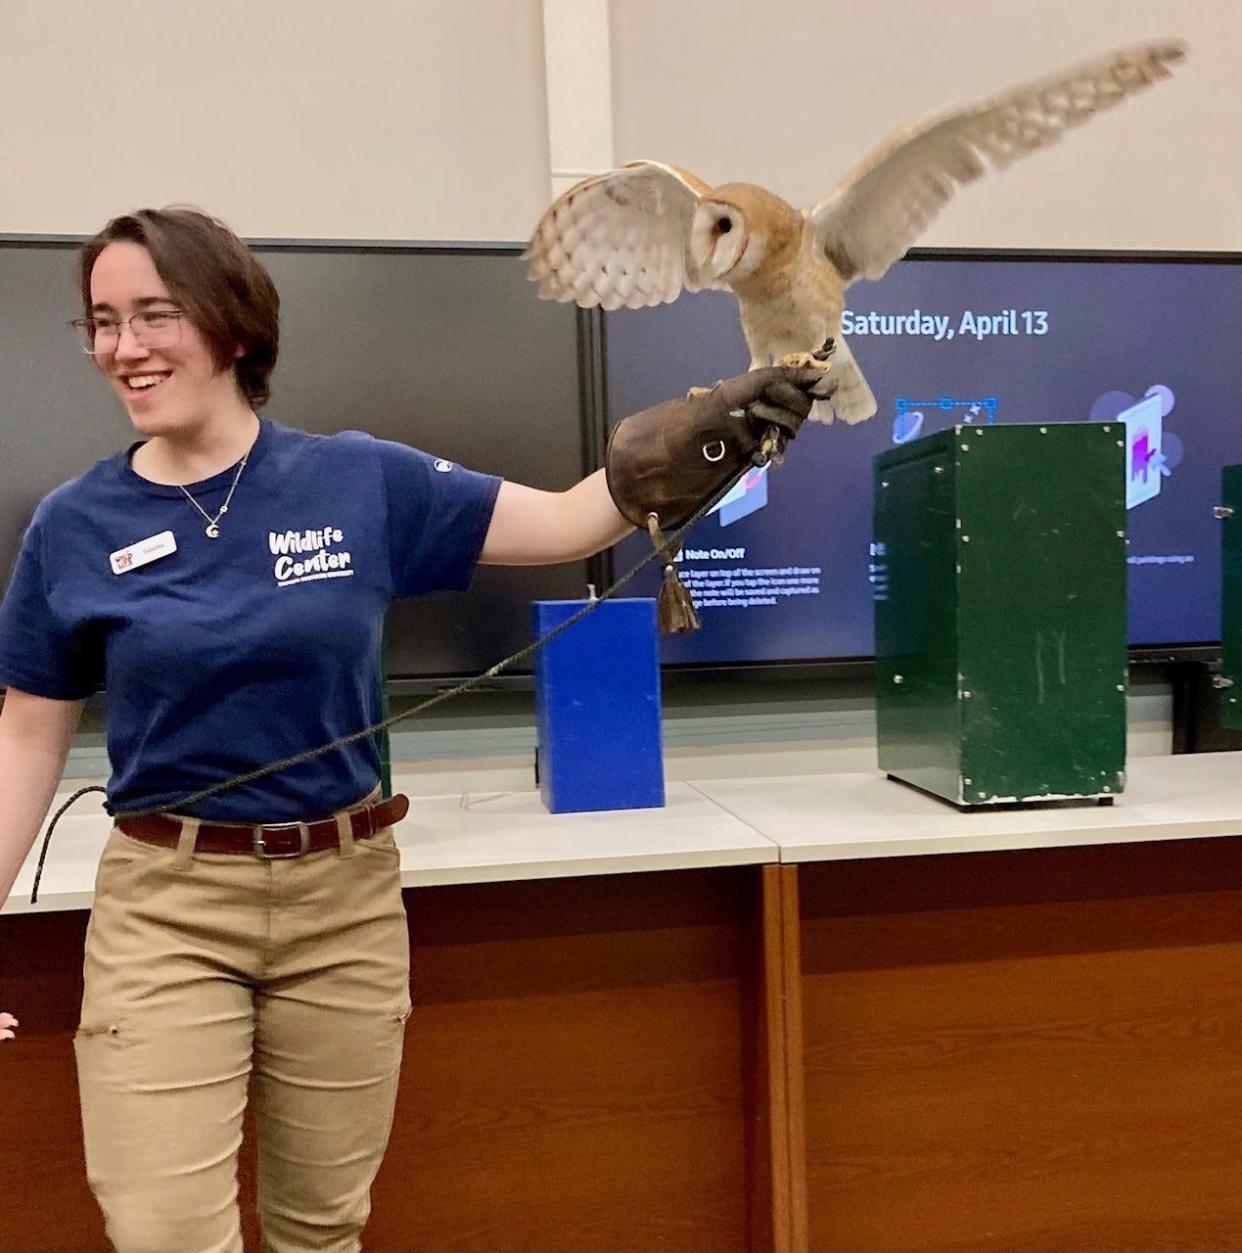 GSU student employee, Tabitha Tederstrom, tends to an animated and protesting barn owl.